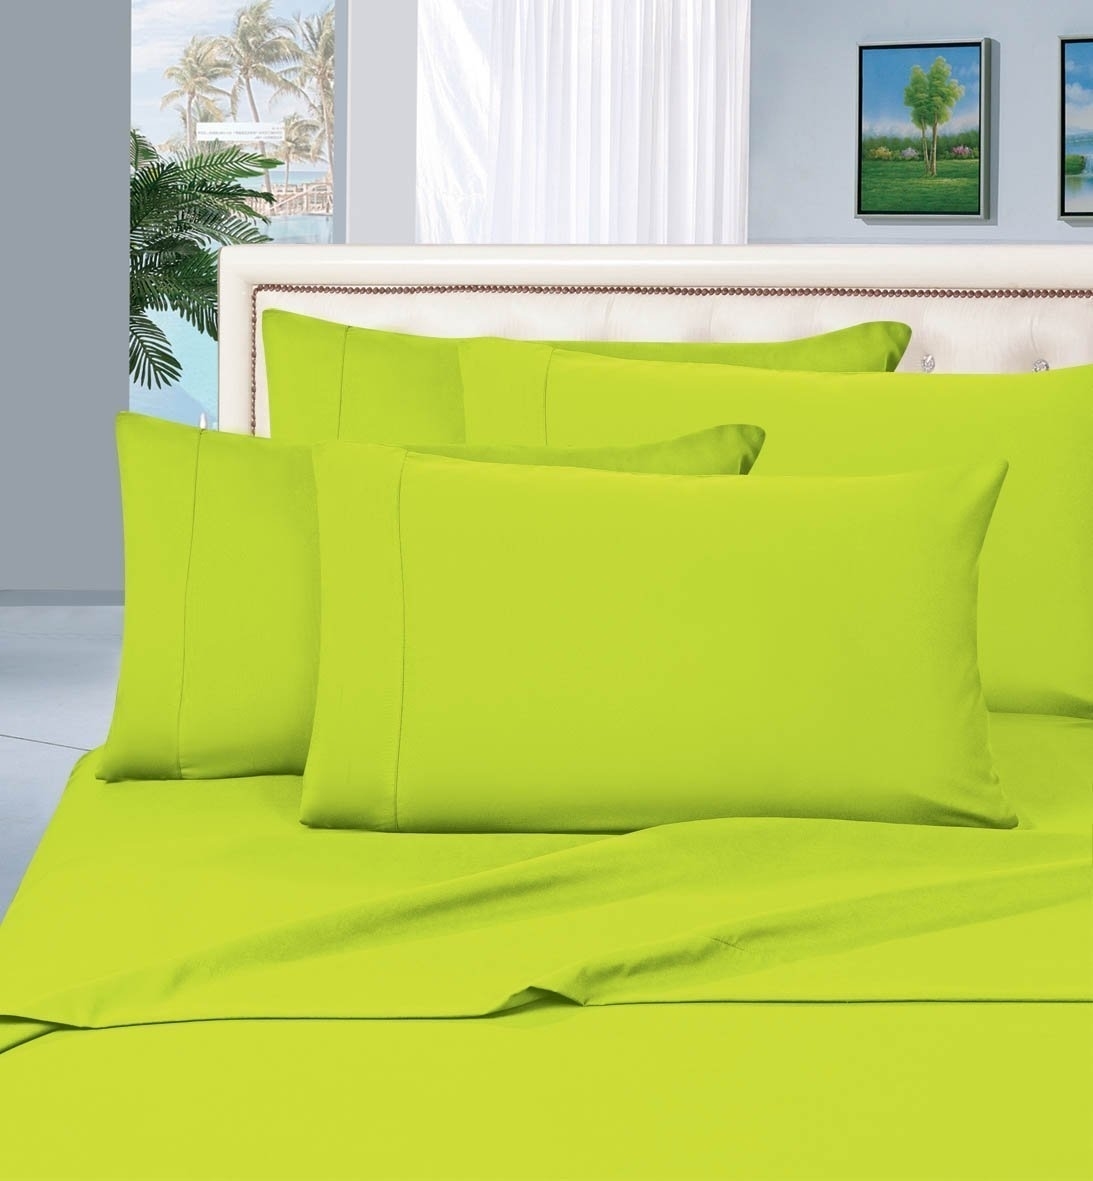 Elegant Comfort 1500 Series Wrinkle Resistant Egyptian Quality Hypoallergenic Ultra Soft Luxury 3-piece Bed Sheet Set, Twin, Lime Green